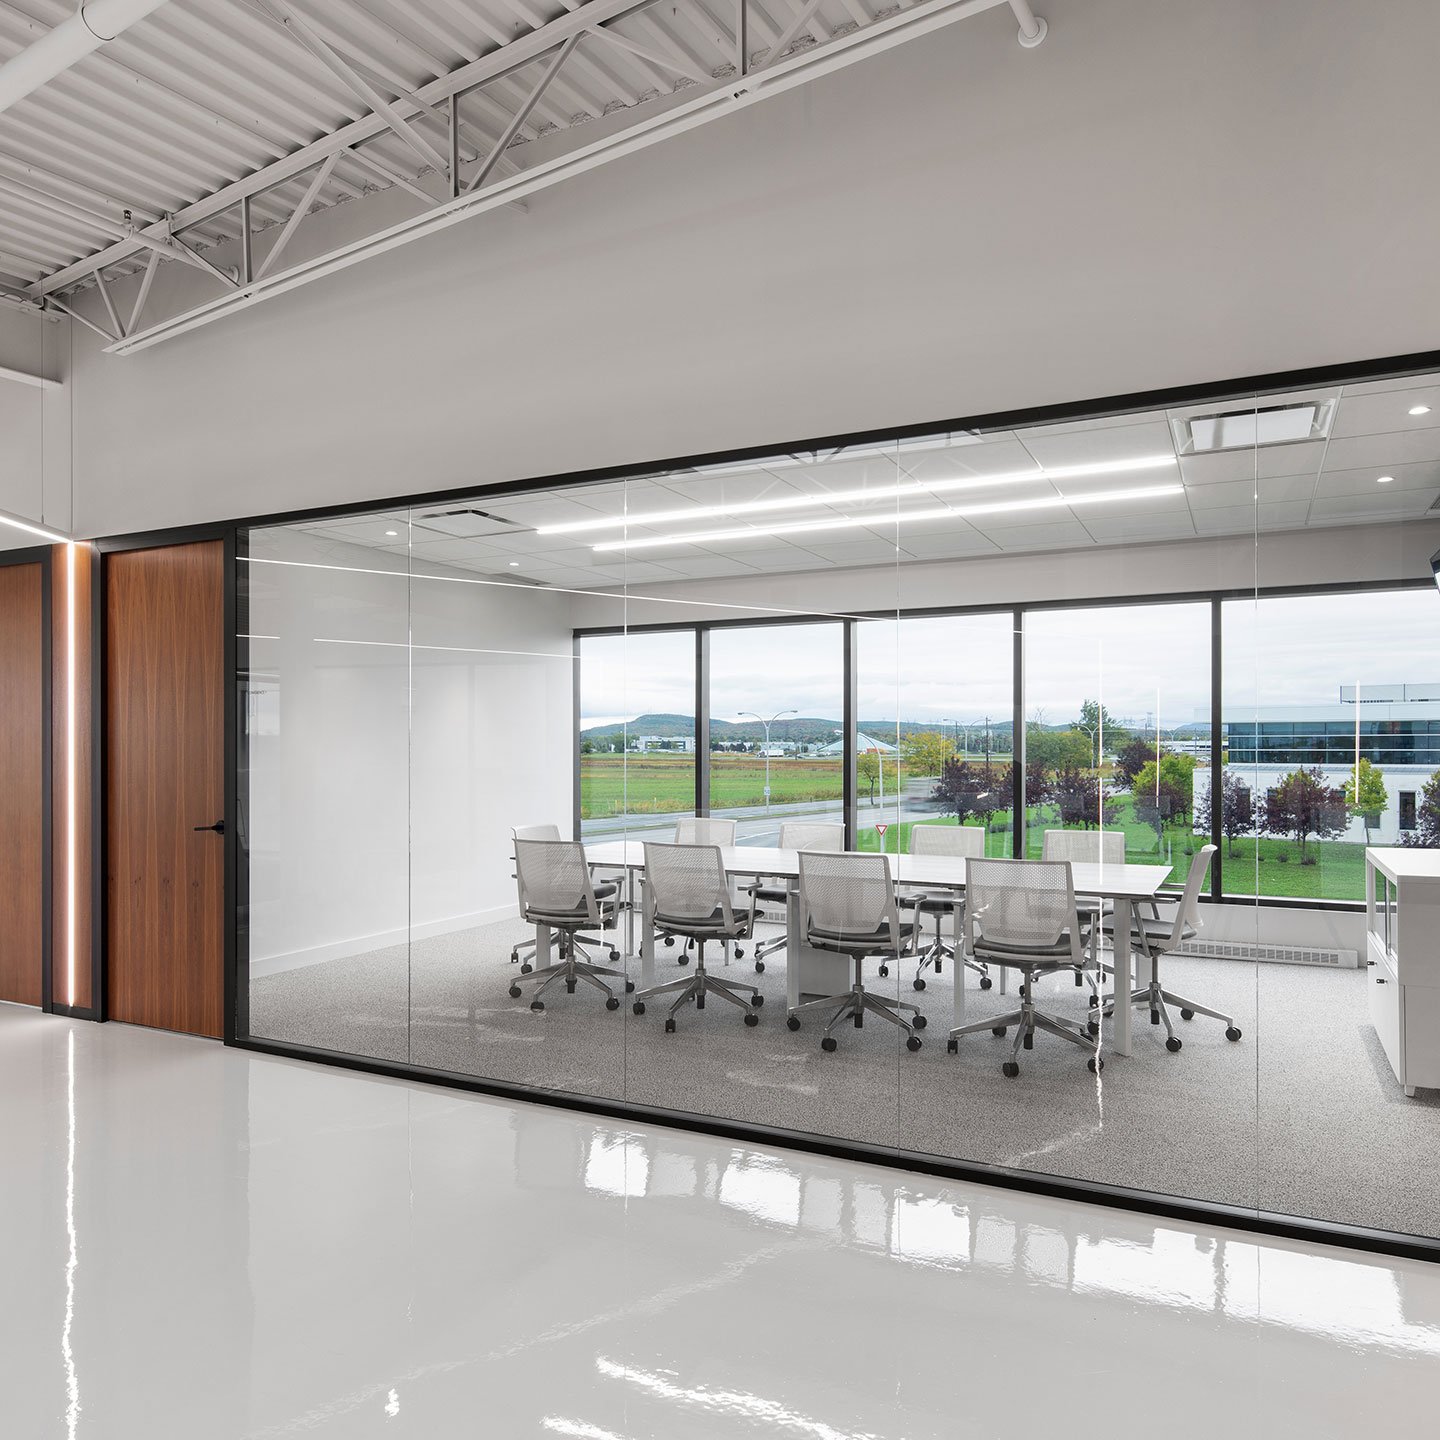 Haworth Enclose Frameless Glass Wall for meeting room with grey chairs and white table